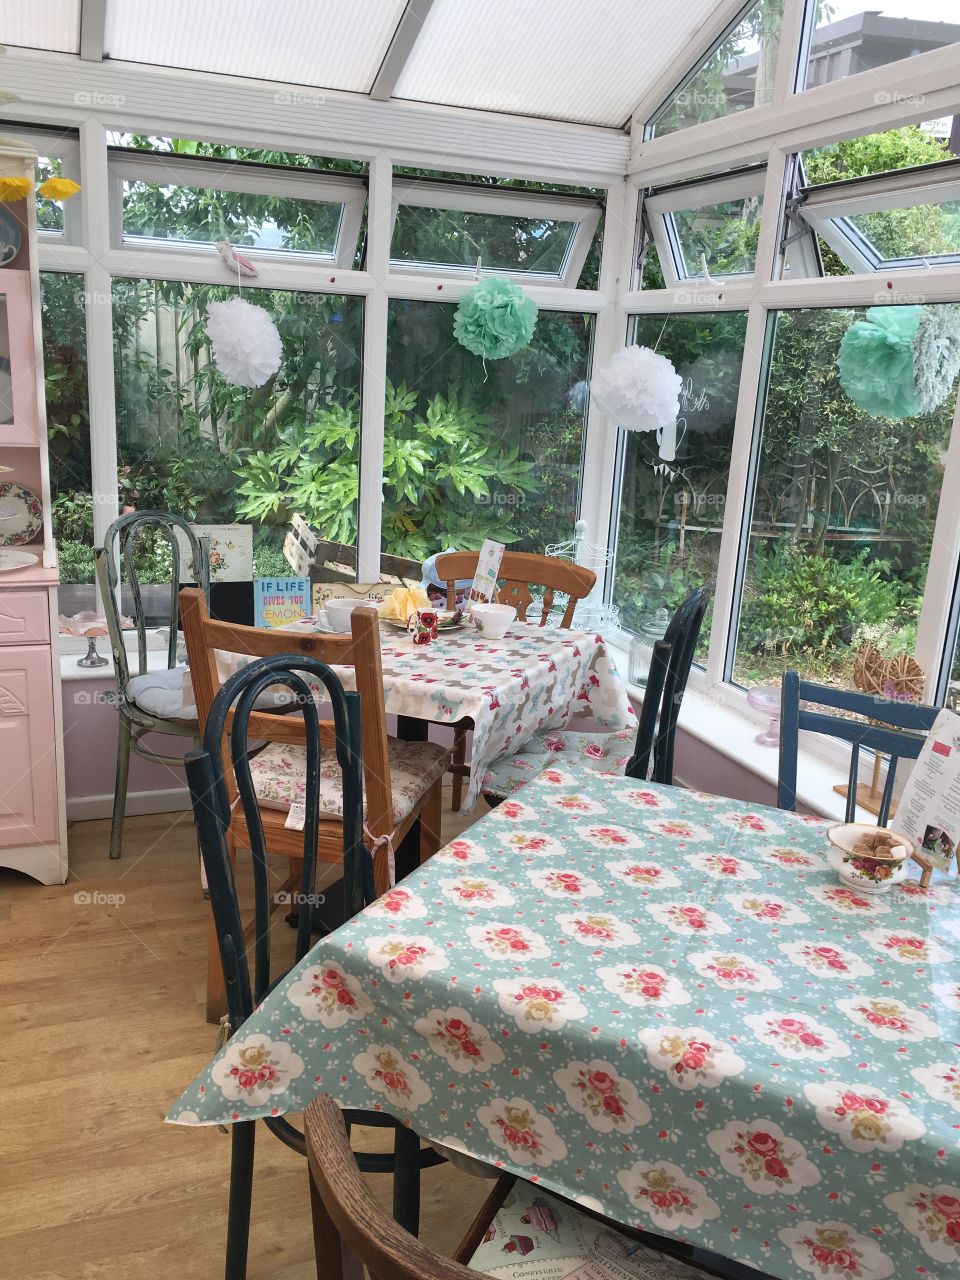 Vintage chic tea room with tables and chairs with pretty tablecloths and decorations hanging in the windows